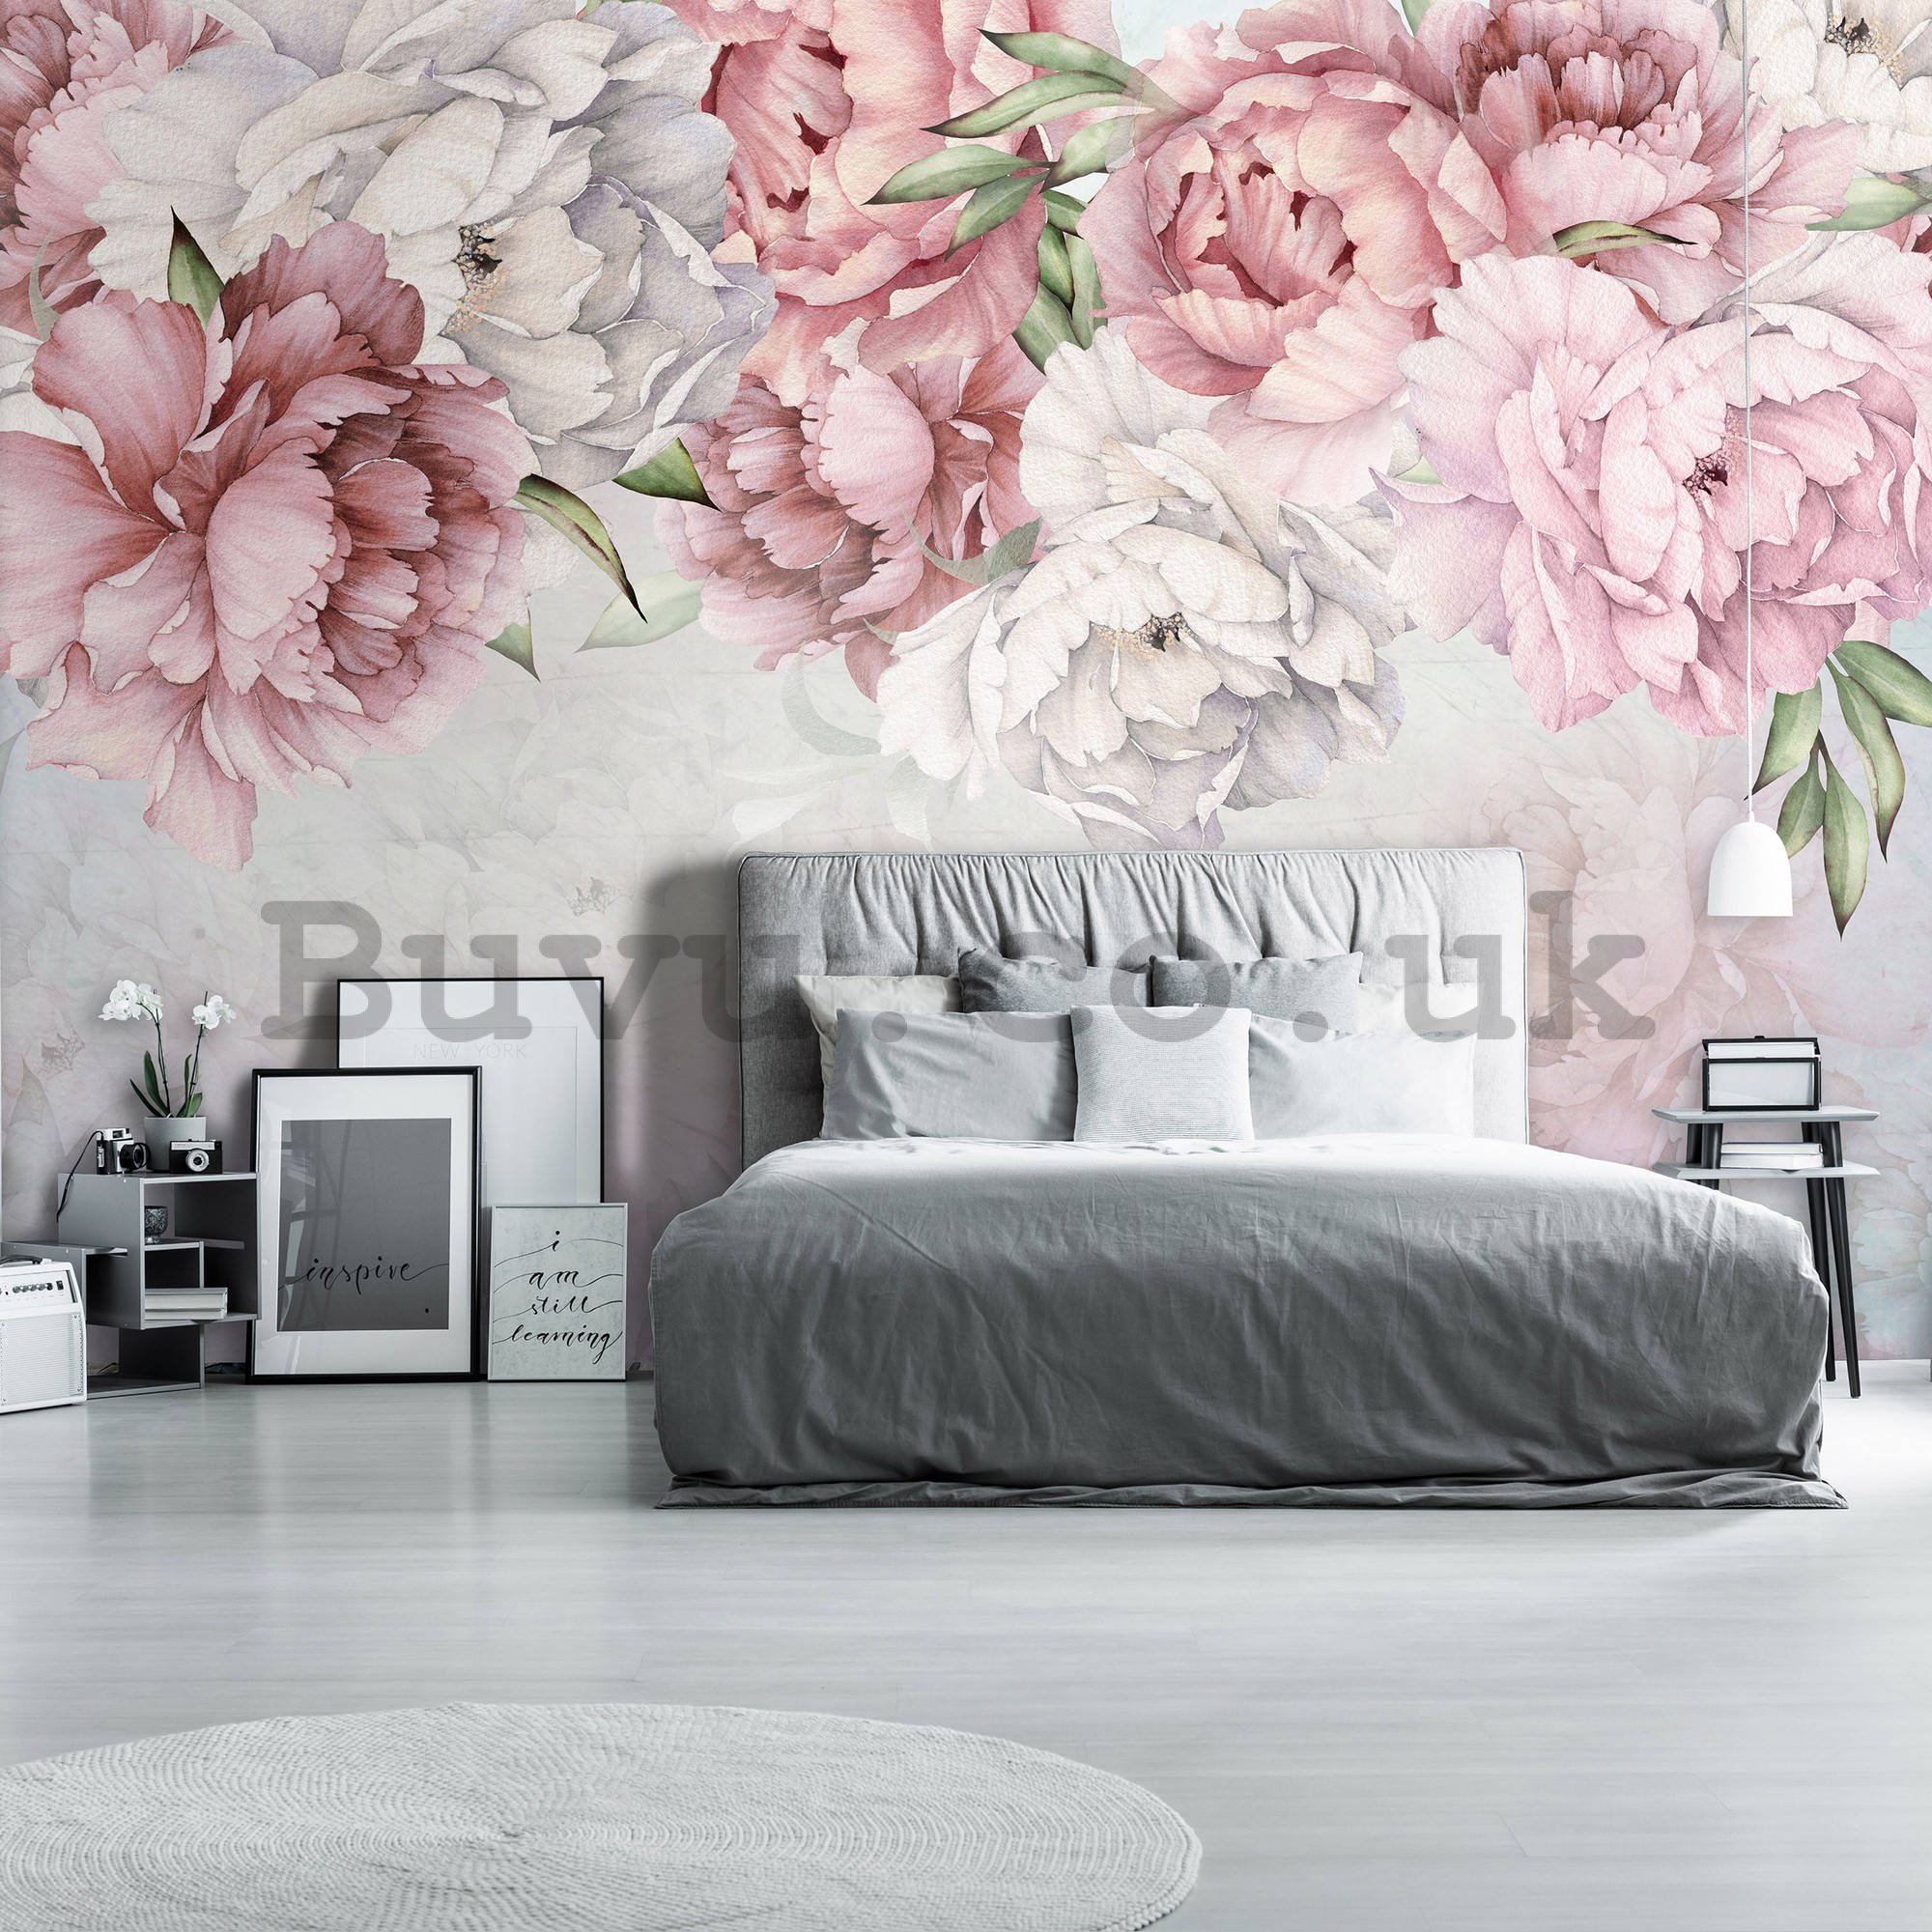 Wall mural vlies: White and pink roses - 254x184 cm